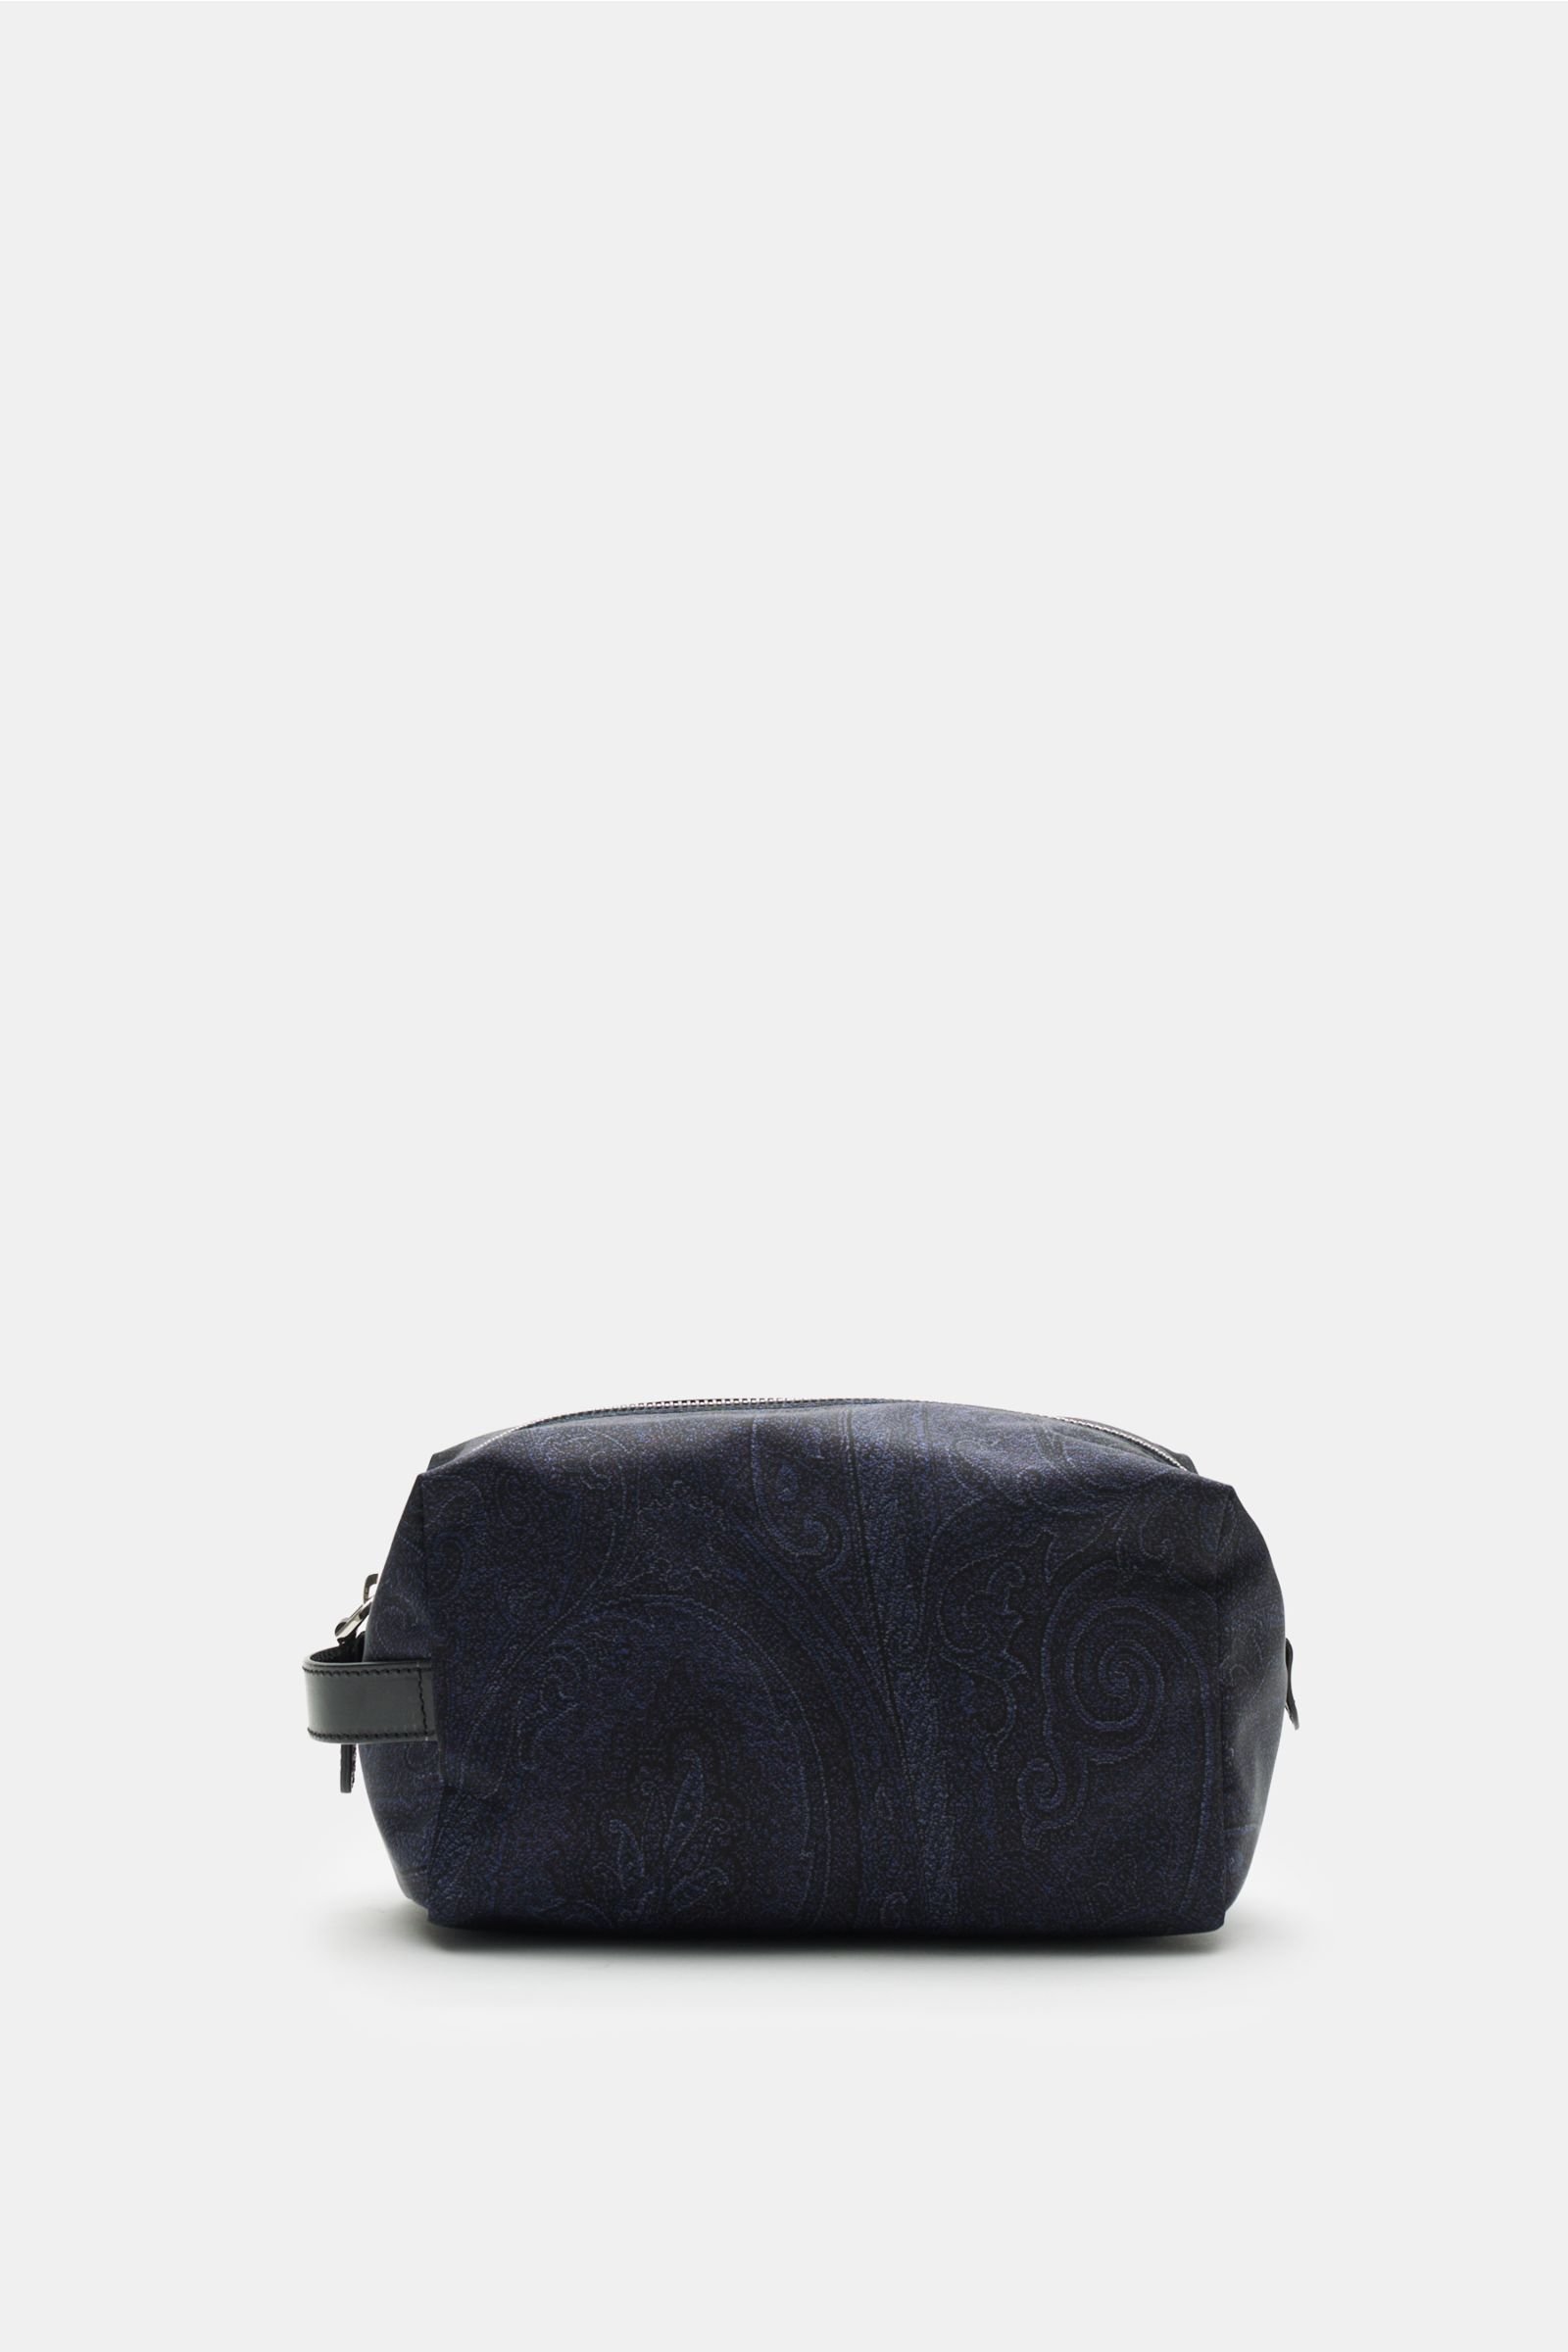 Toiletry bag navy patterned